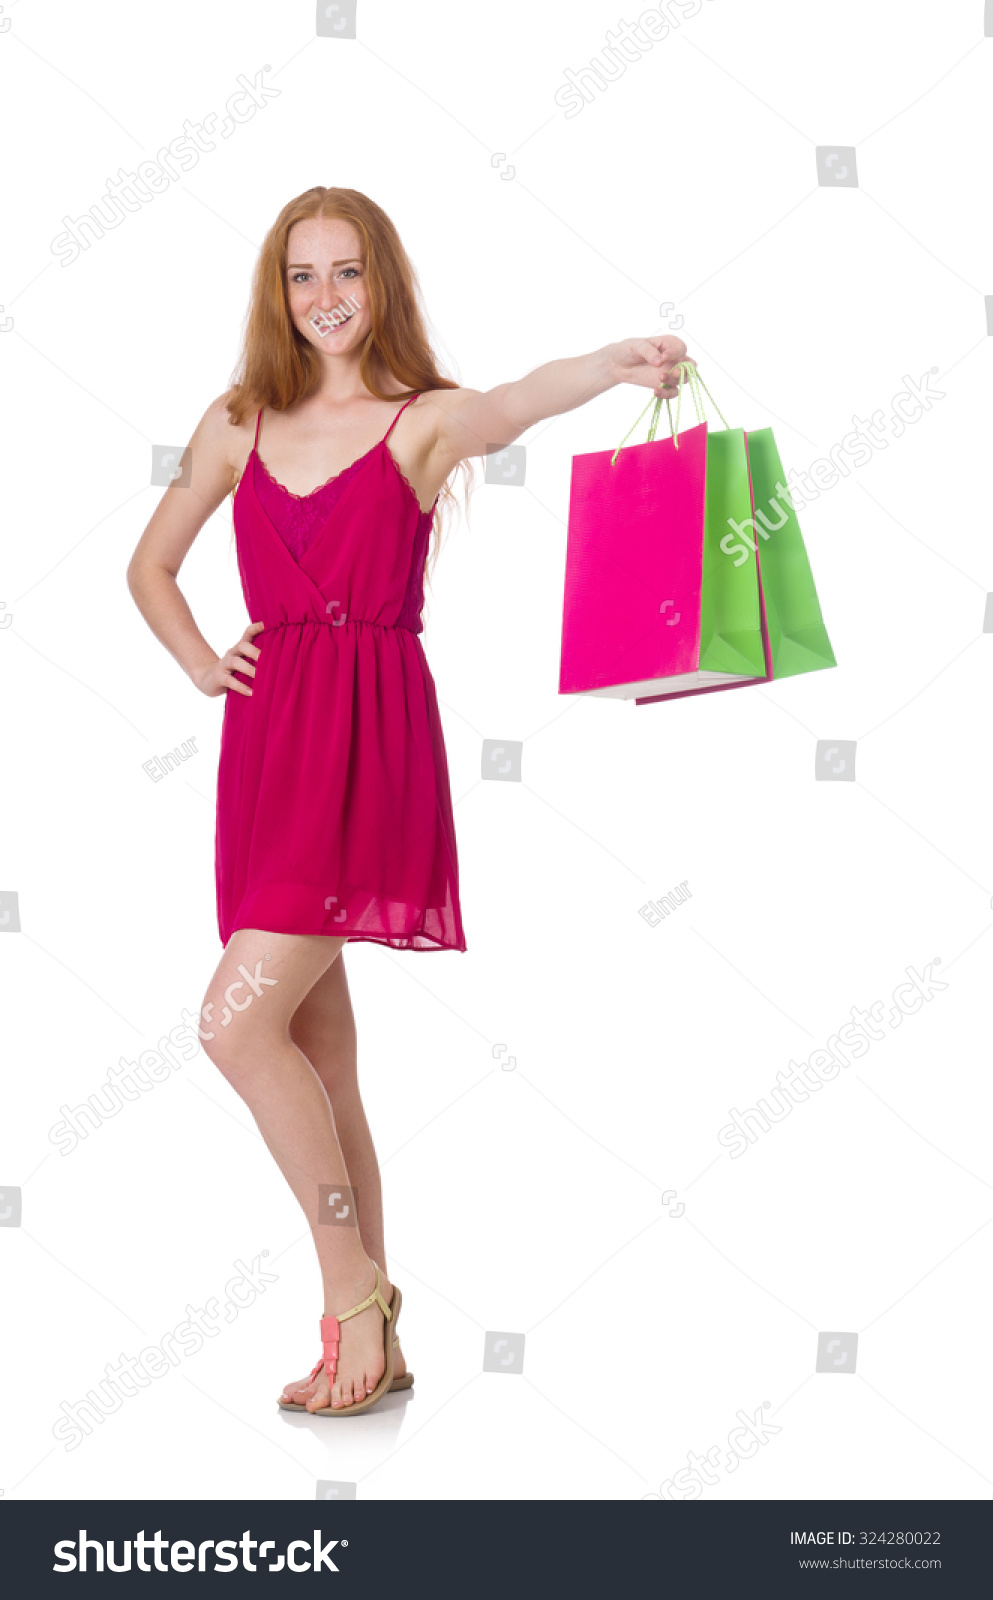 Woman with shopping bags isolated on white #324280022